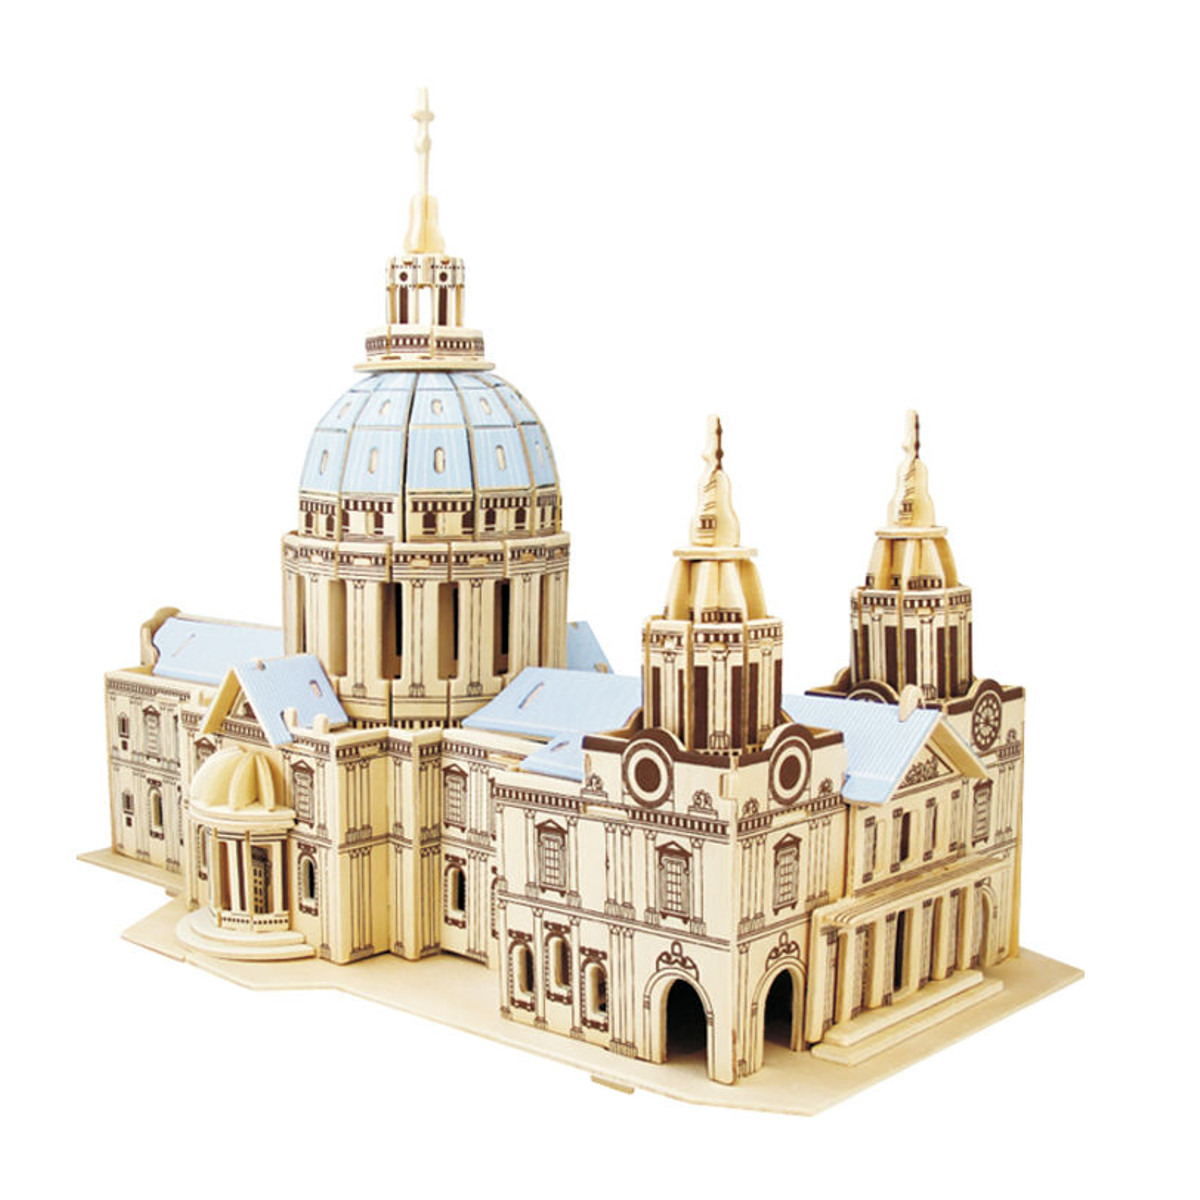 

3D Wooden St. Paul's Cathedral Model Educational Toys Puzzle For Children Adult Hobby Gift